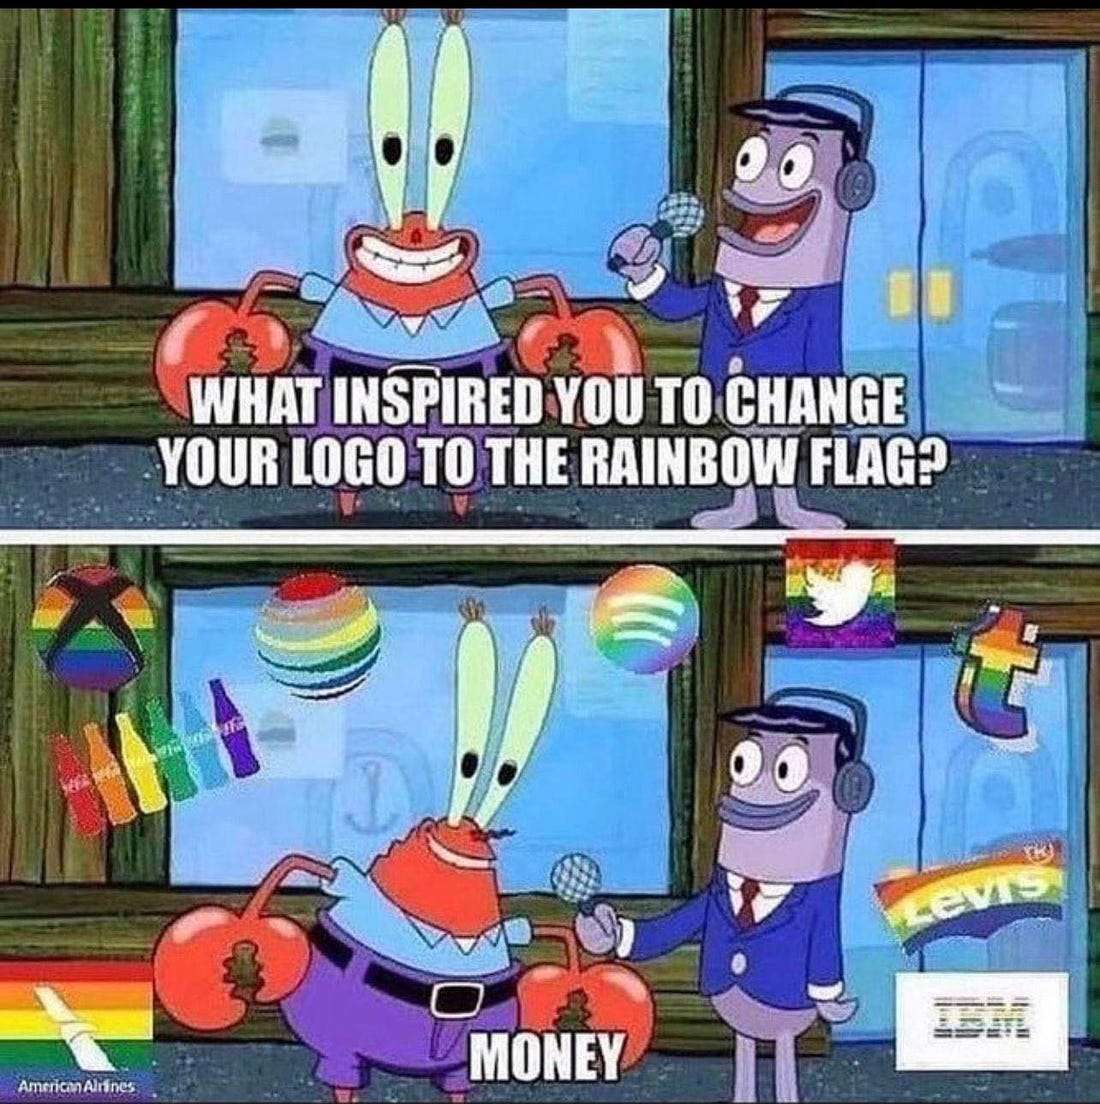 May be a cartoon of text that says 'WHAT INSPIRED YOU TO CHANGE YOUR LOGO TO THE RAINBOW FLAG? AmericanAlrines MONEY IM'